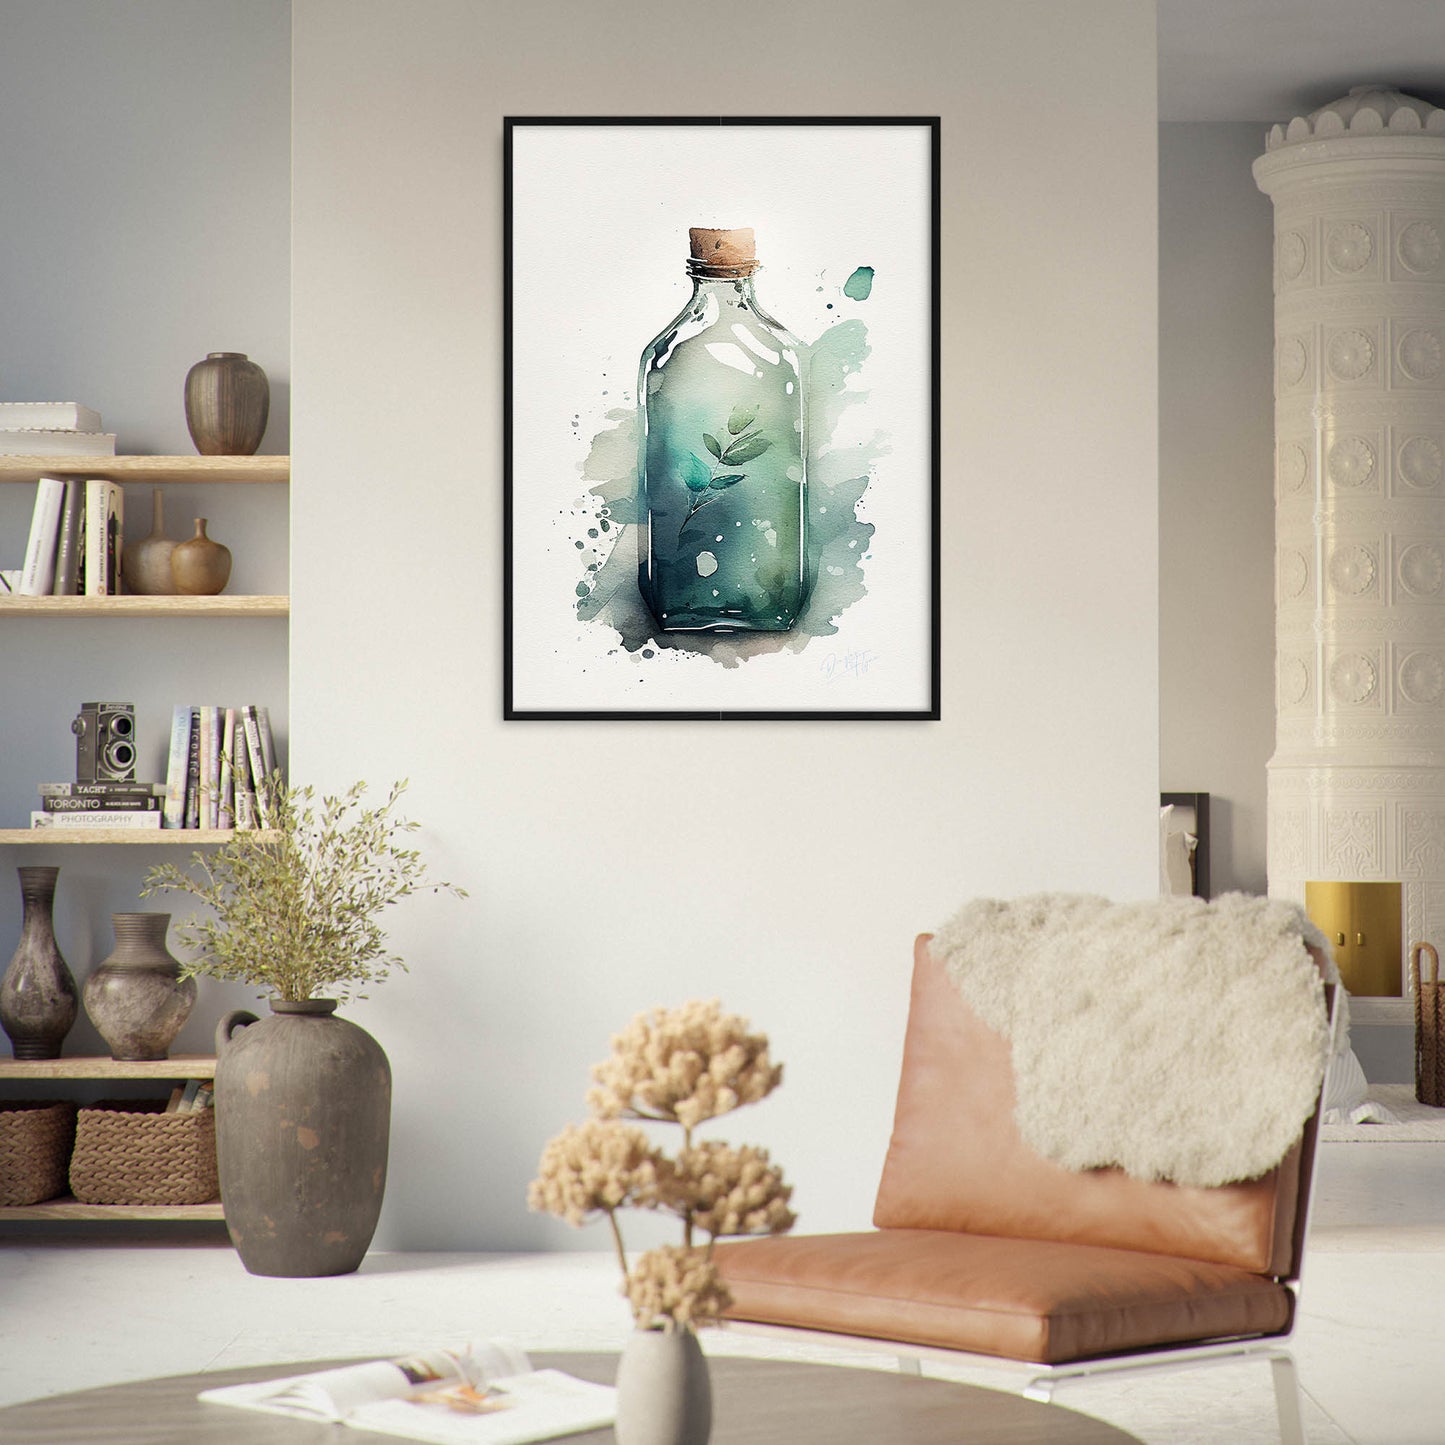 »Lone Bottle Reflections« retro poster